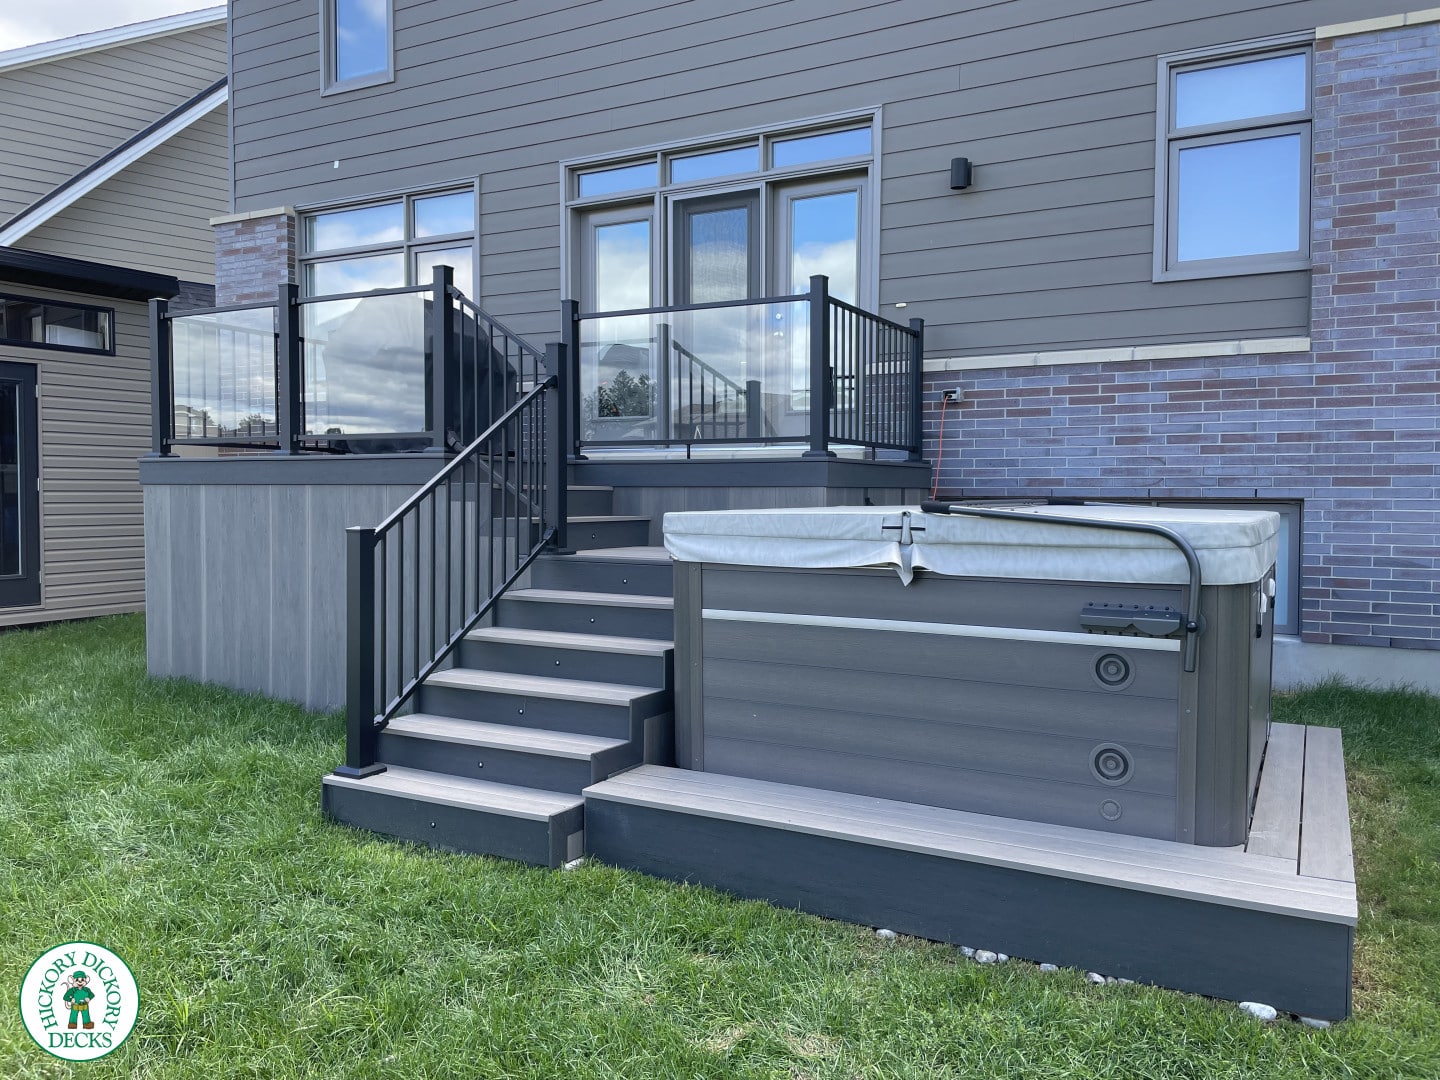 composite deck with glass railings and hottub